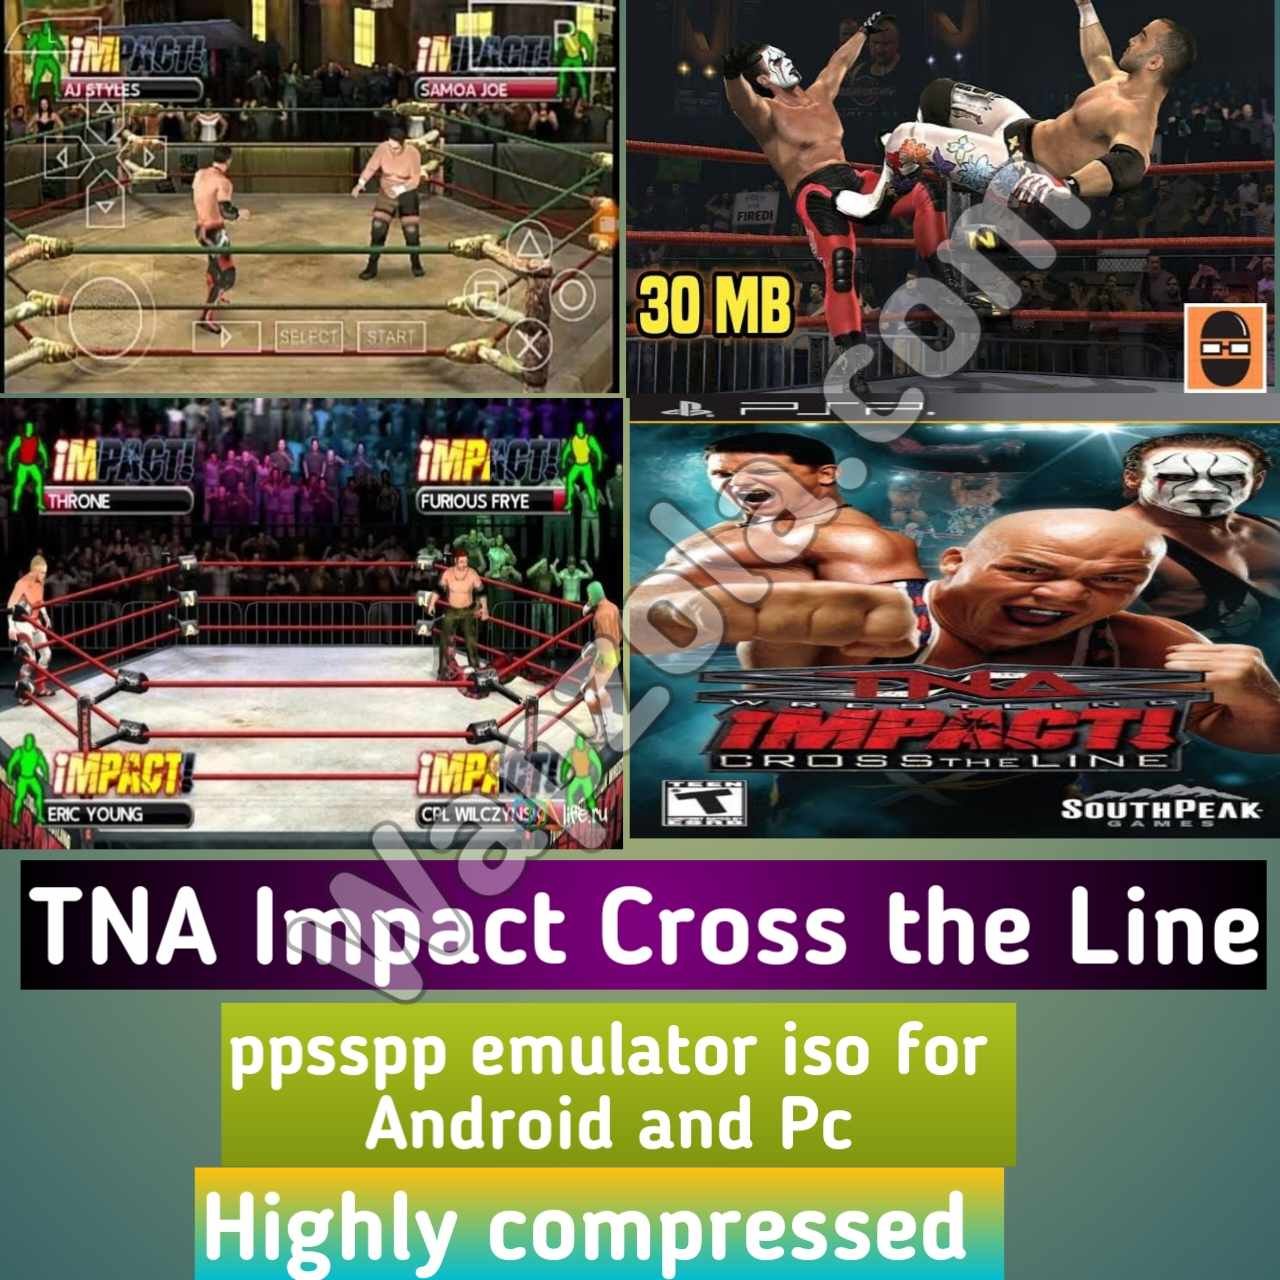 You are currently viewing [Download] TNA Impact Wrestling: Cross the Line ppsspp emulator – PSP APK Iso highly compressed 20MB